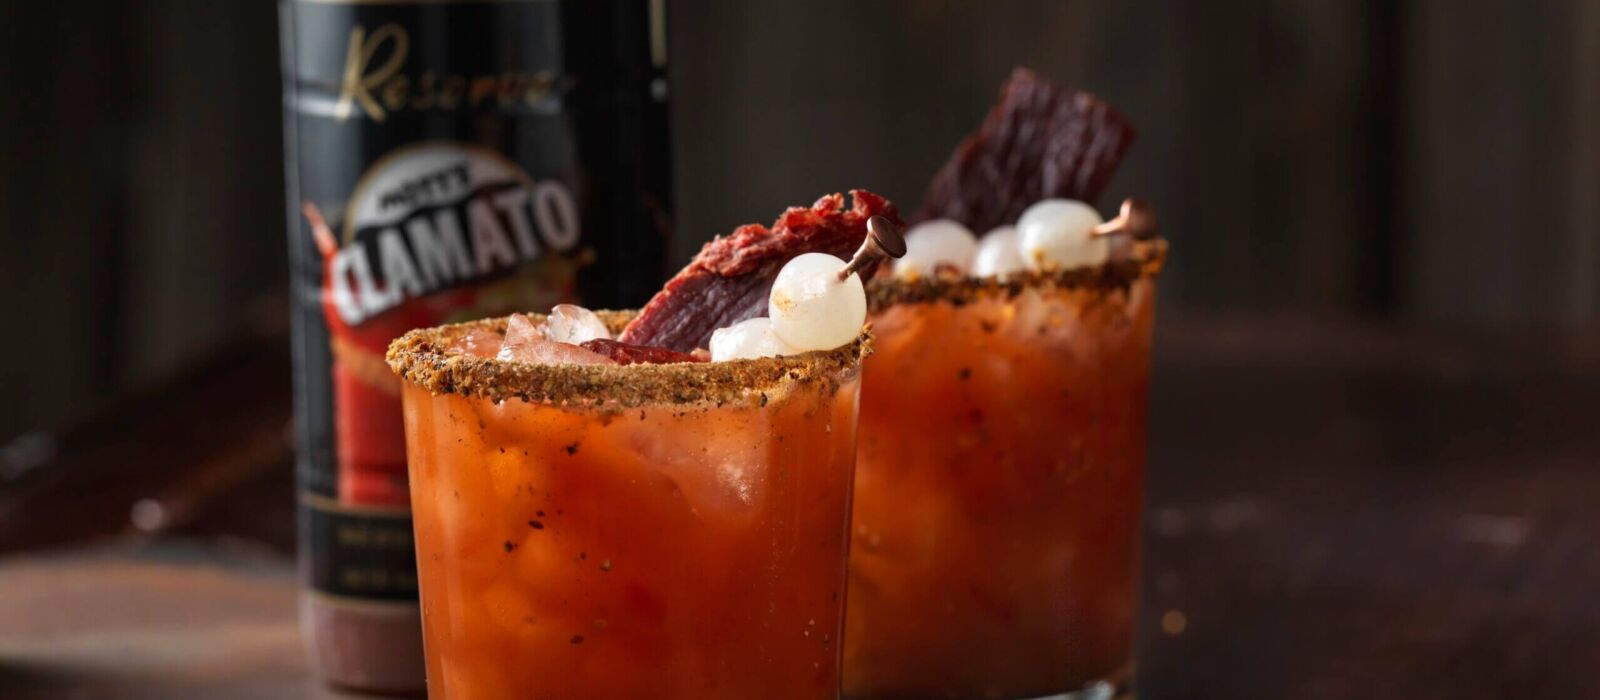 Two caesar's garnished with pepperoni sticks and pickled inions in front of Mott's Clamato reserver bottle